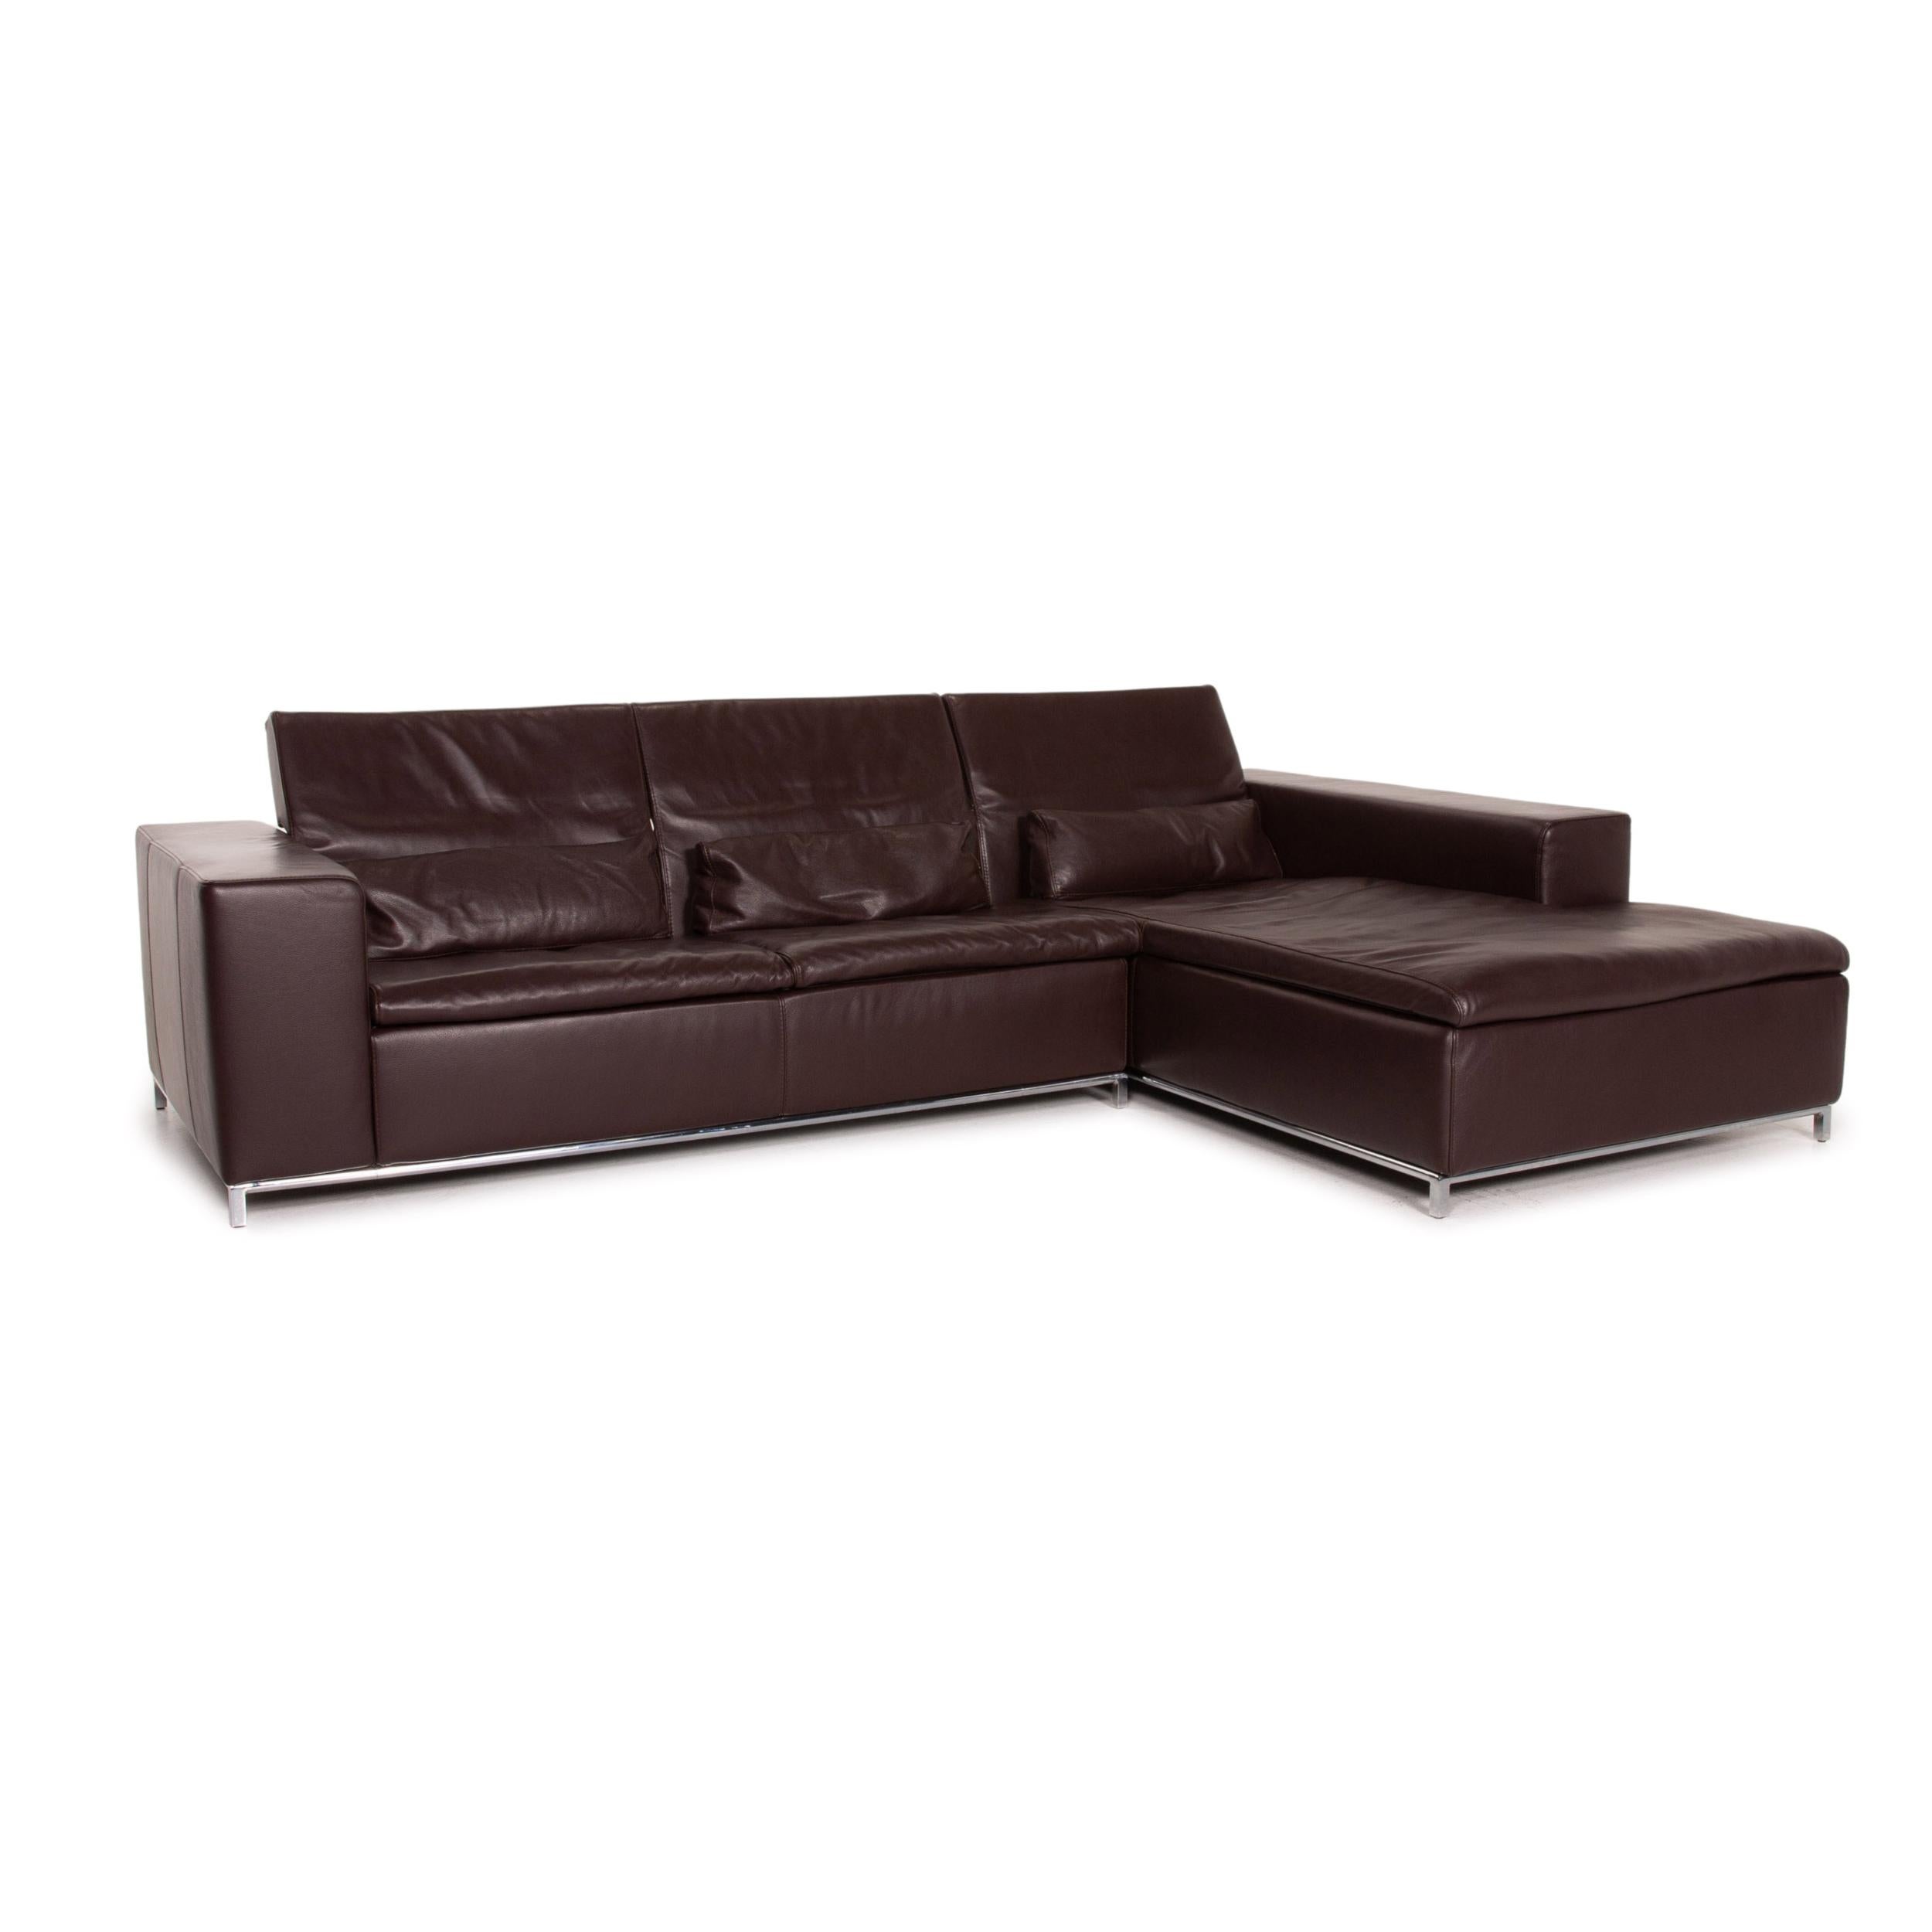 Modern Who's Perfect Leather Corner Sofa Brown Dark Brown Sofa Couch